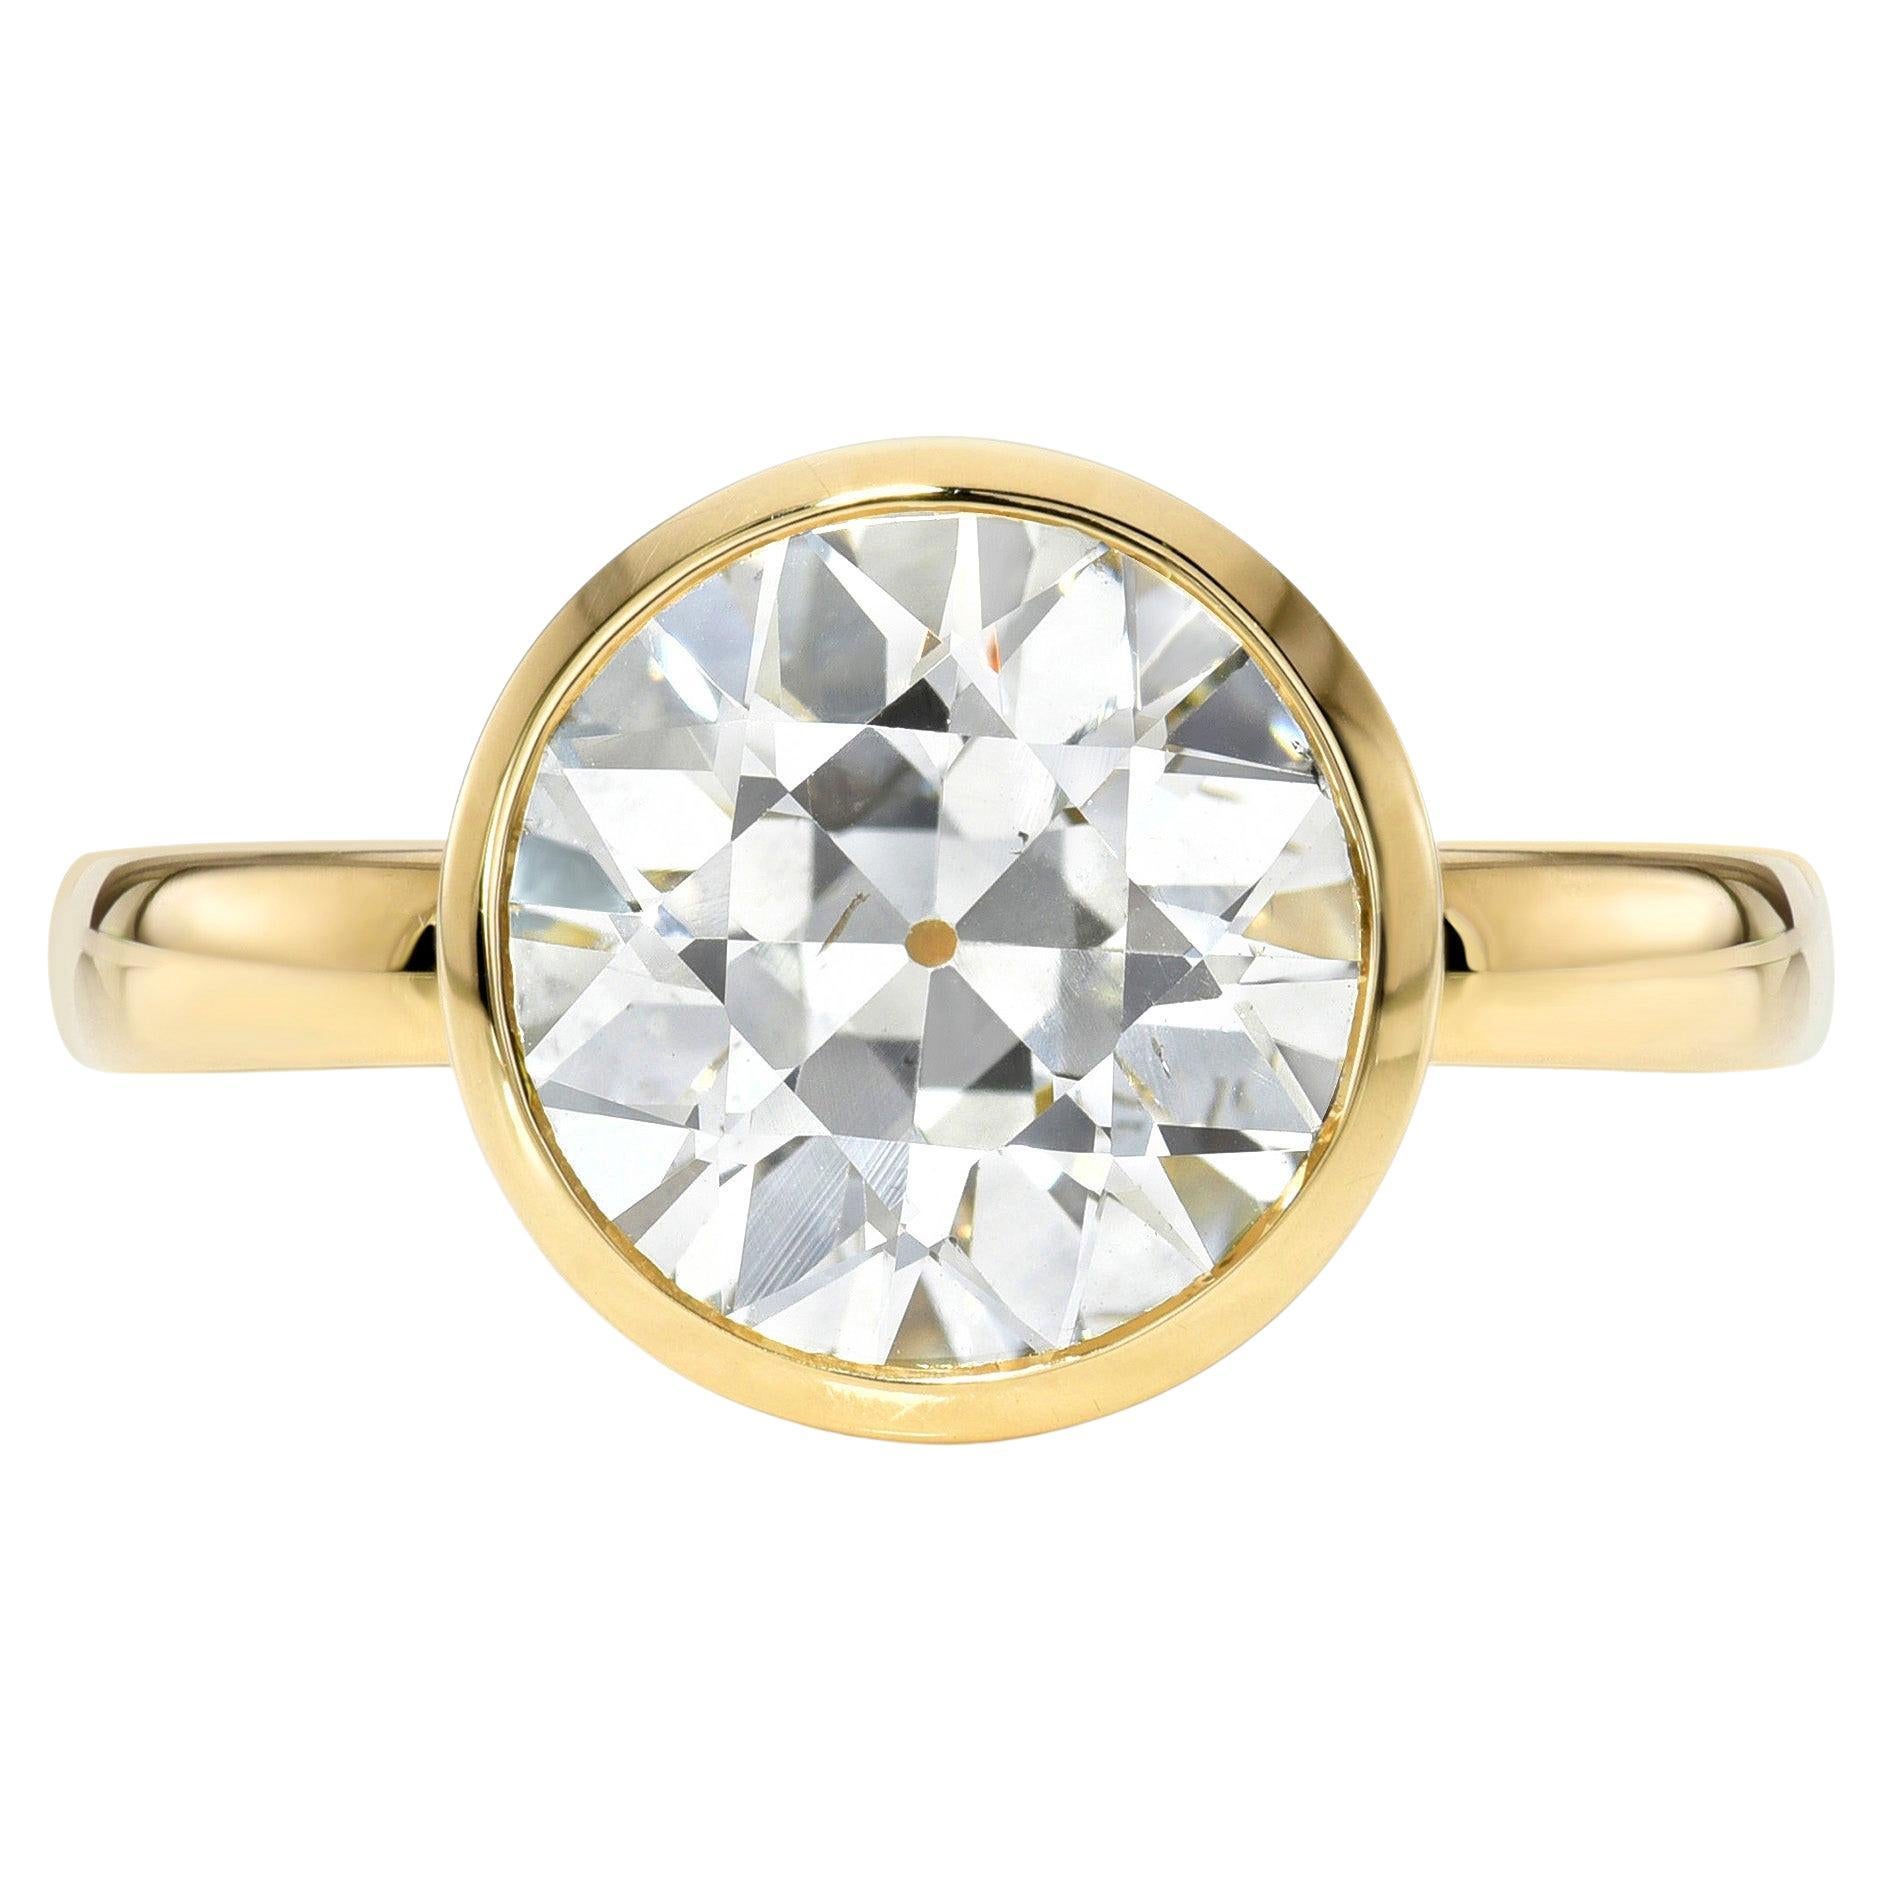 Handcrafted Wyler Old European Cut Diamond Ring by Single Stone For Sale